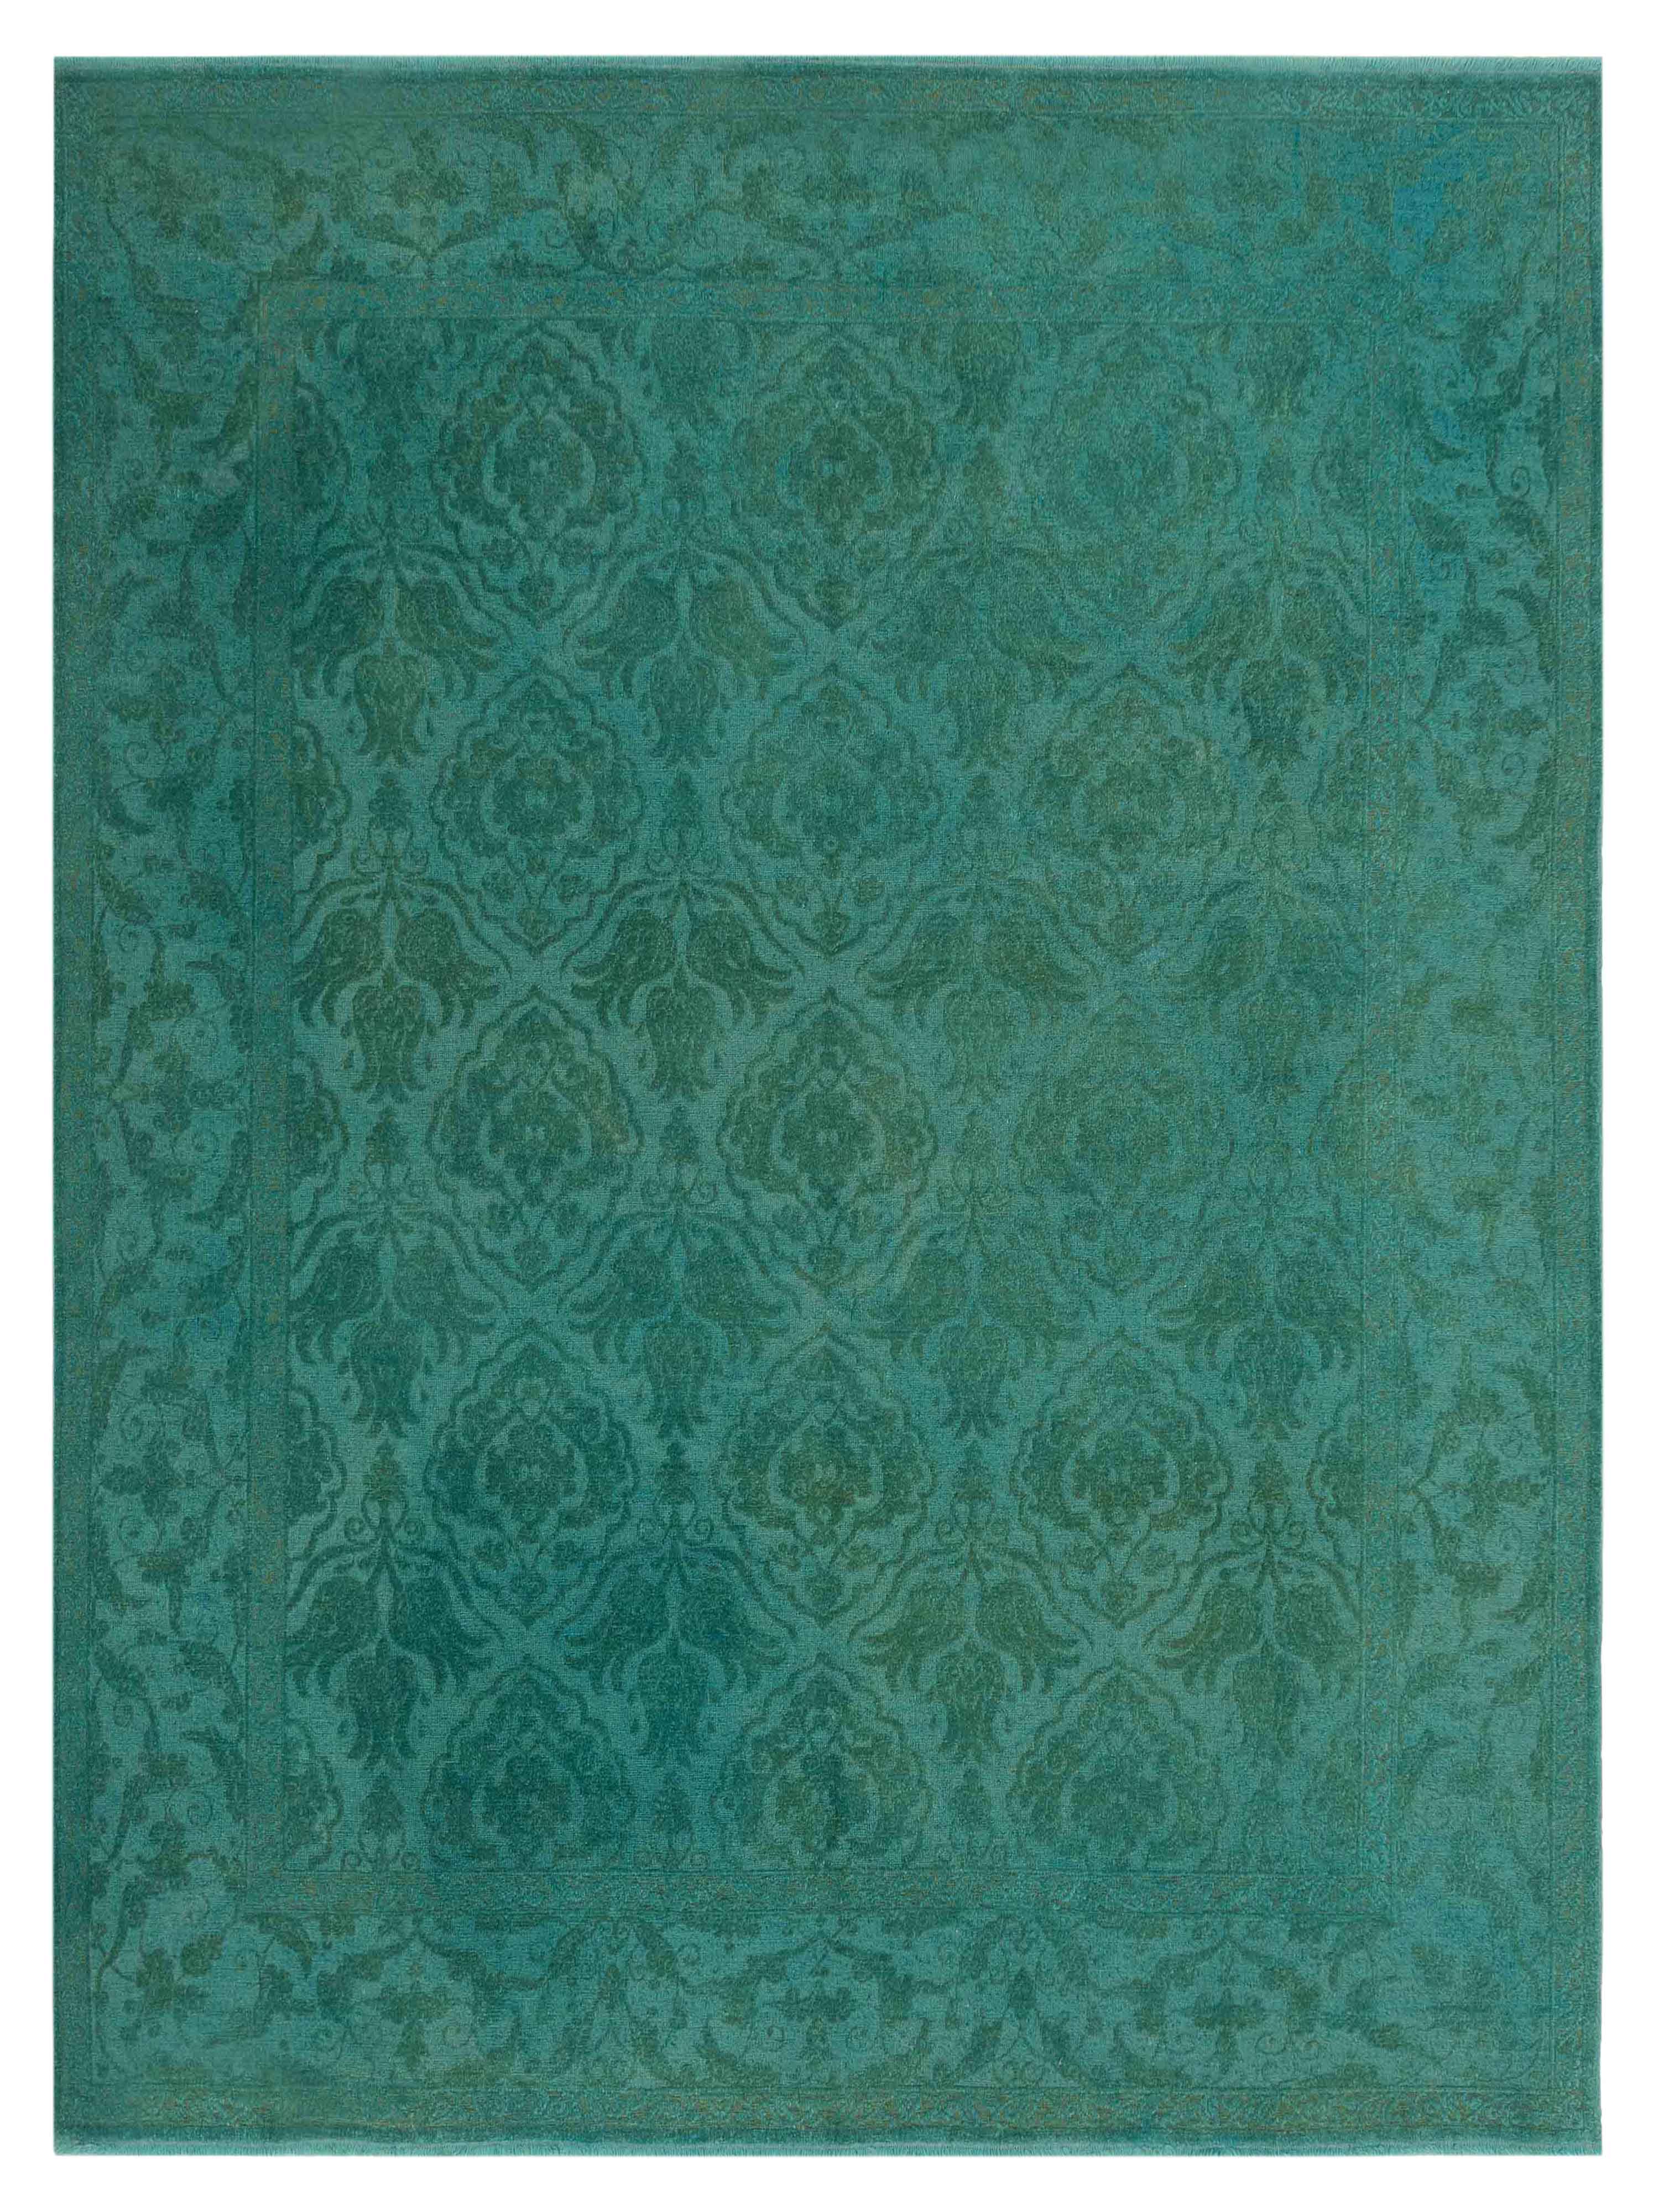 Transitional Turquoise 8x10 Area Rug	